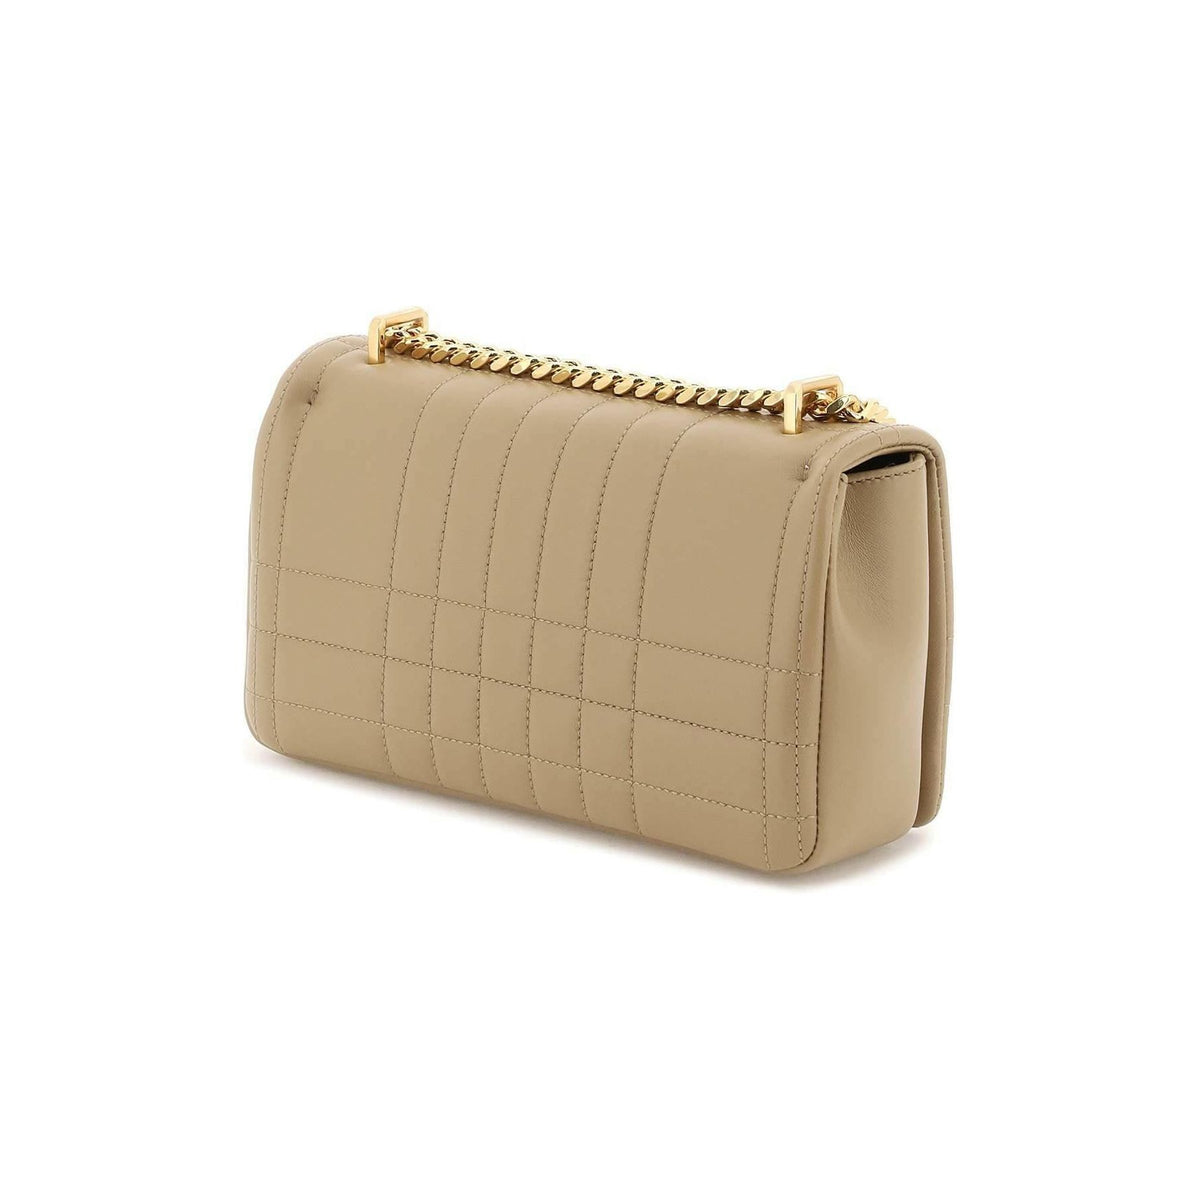 BURBERRY - Oat Beige Quilted Leather Small Lola Bag - JOHN JULIA